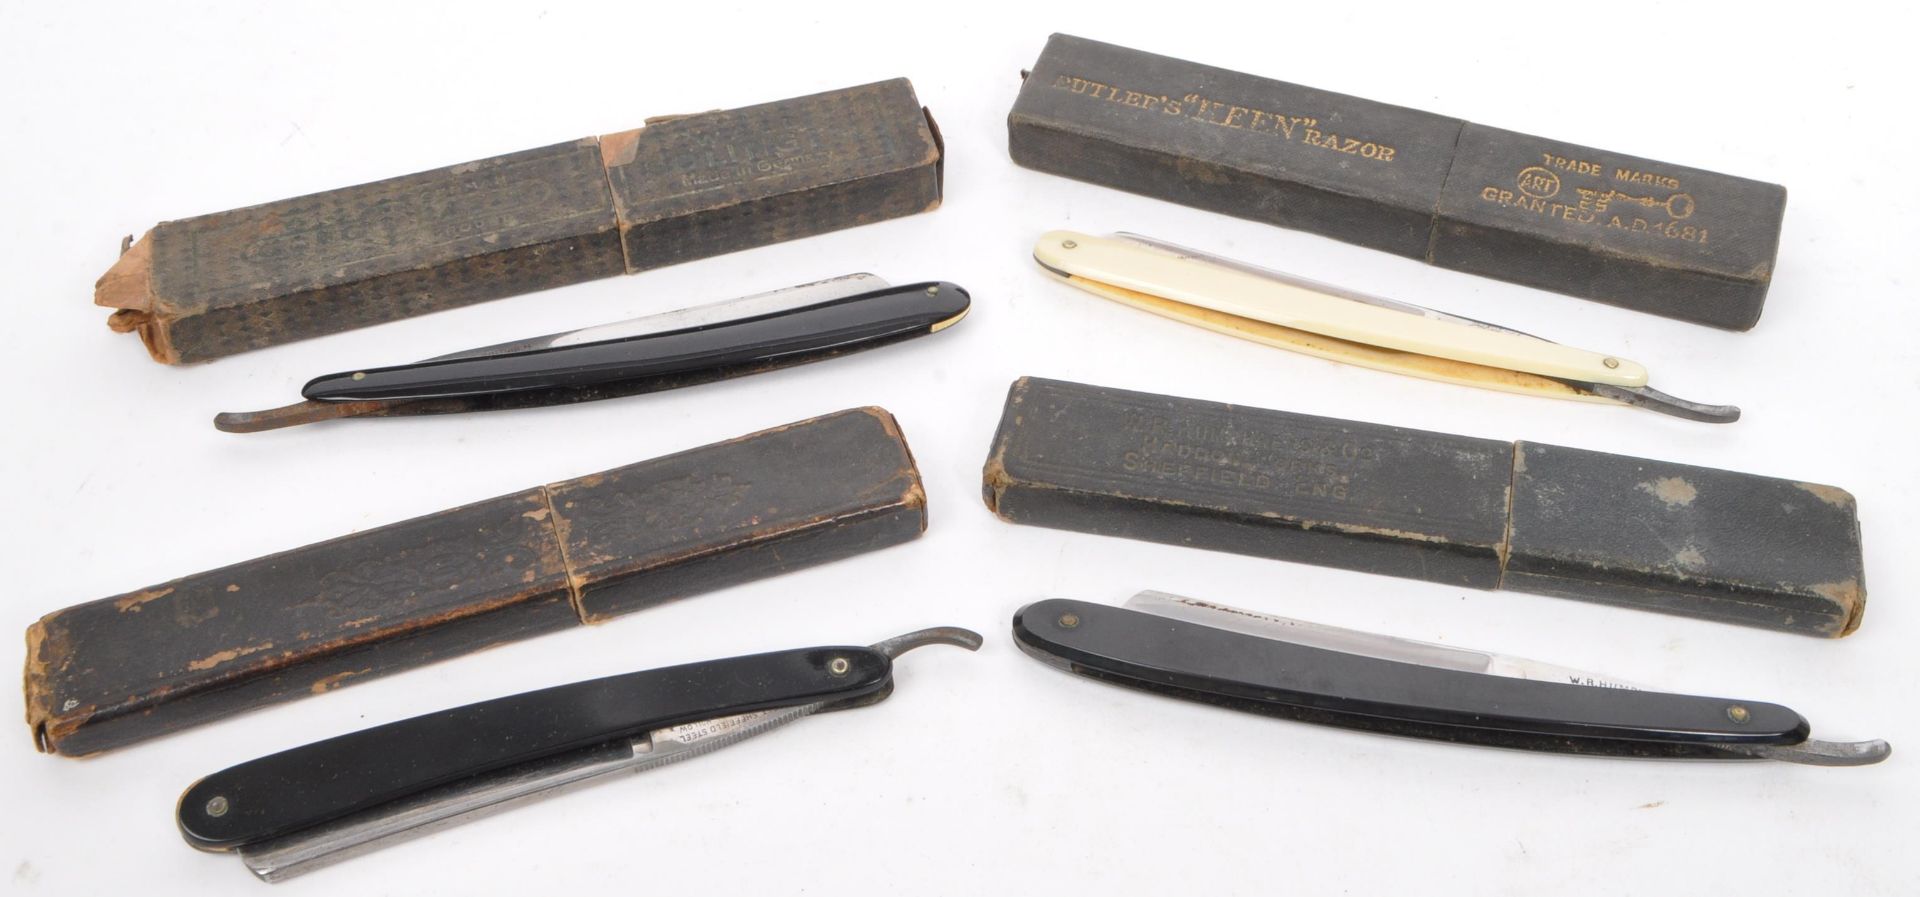 COLLECTION OF EARLY TO MID 20TH CENTURY CUT THROAT RAZORS